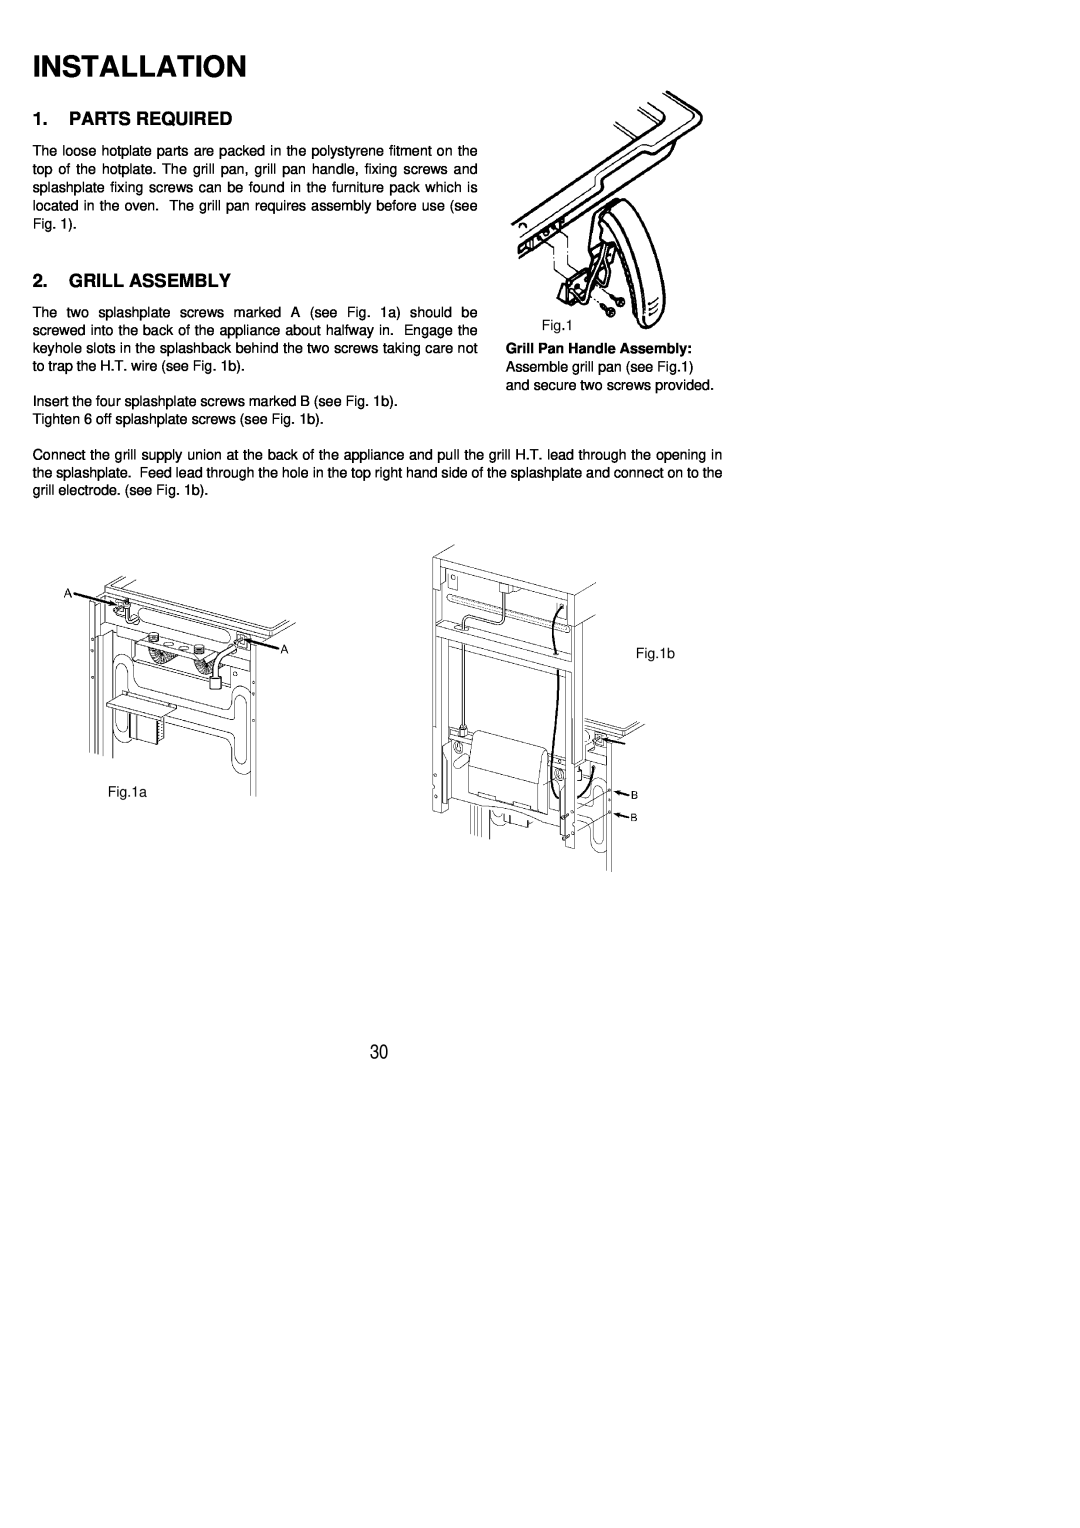 Parkinson Cowan Libra installation instructions Installation, Parts Required, Grill Assembly 